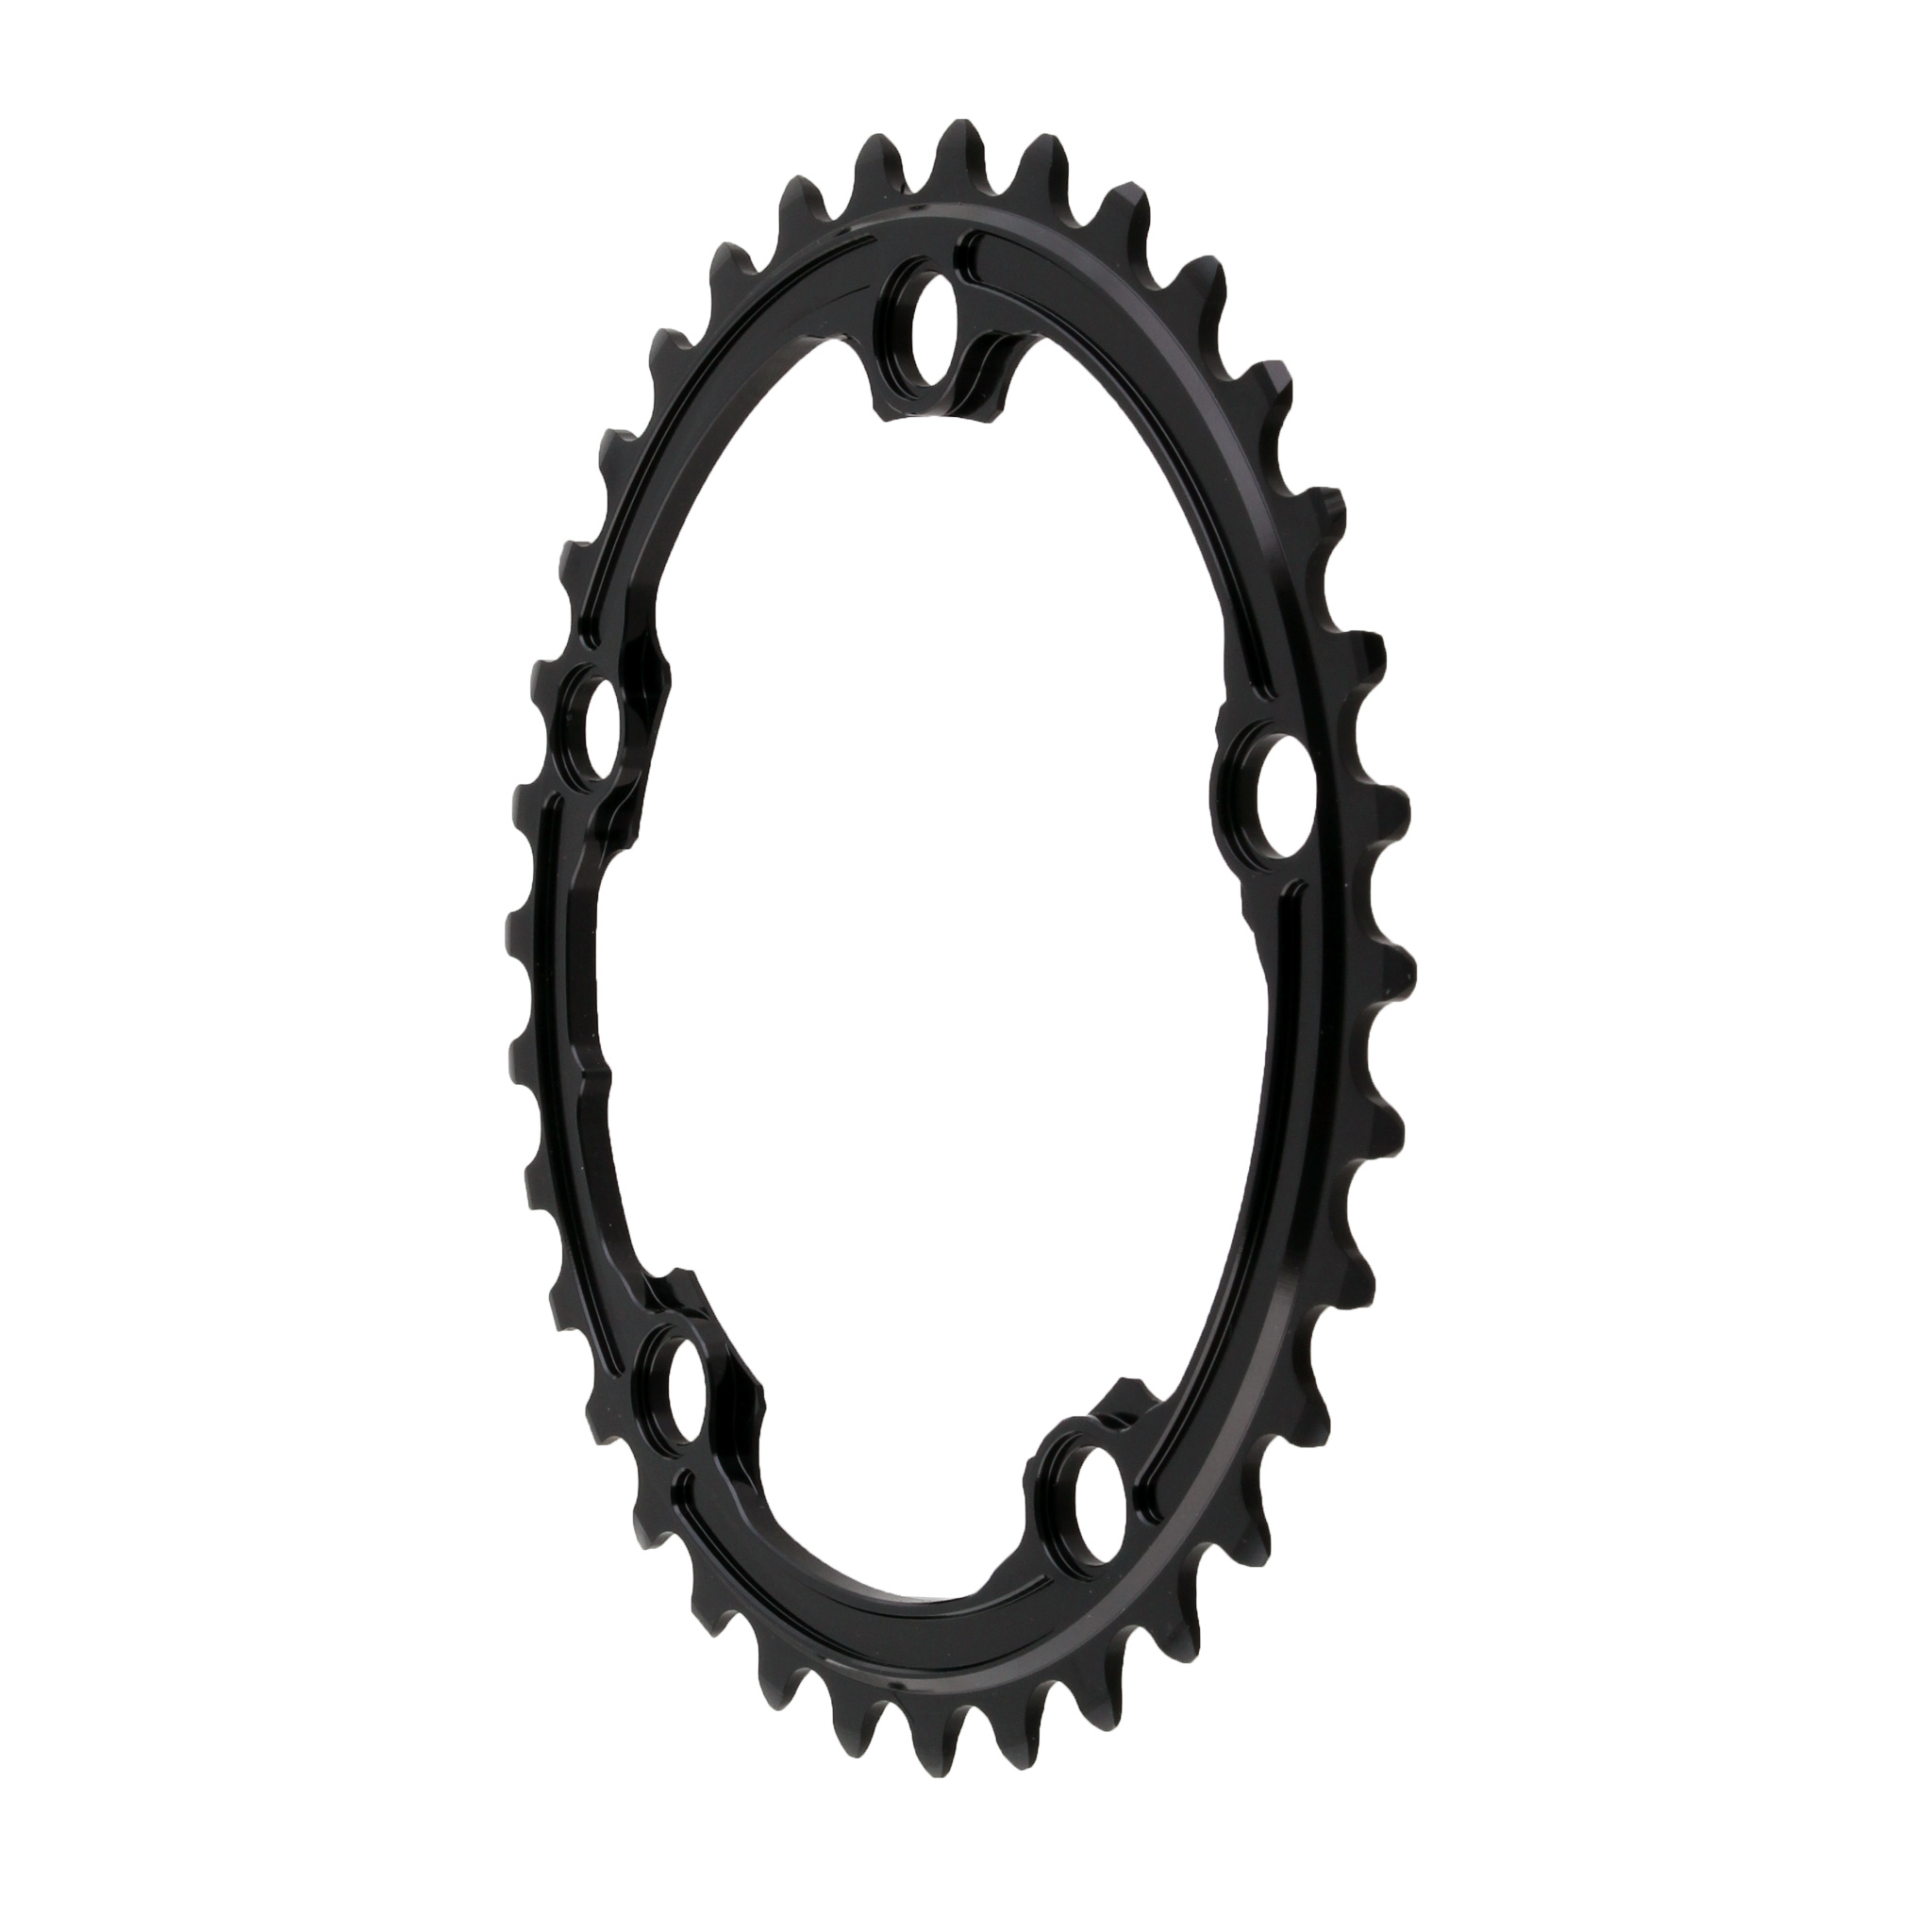 Absolute Black Premium Oval Road Chainring, 5x110BCD 34T - Black